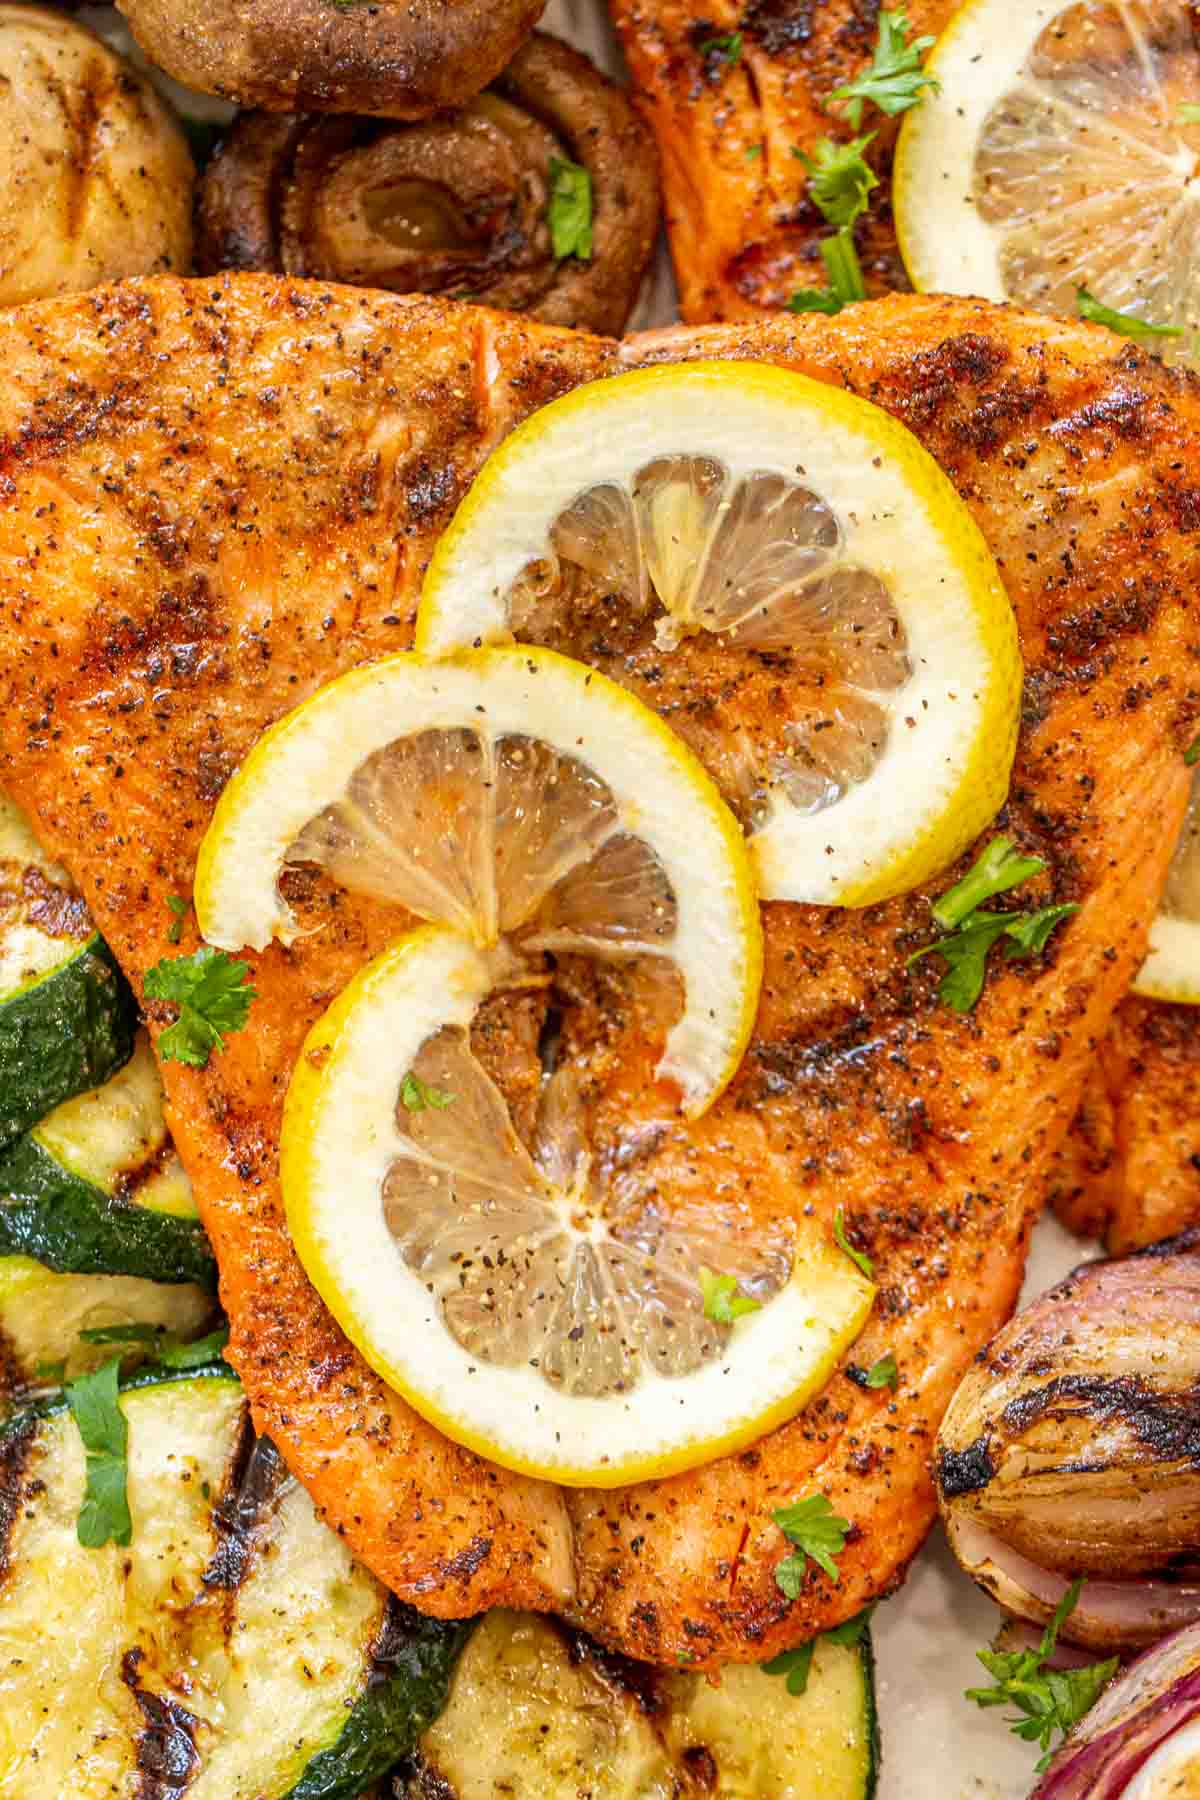 Salmon fillets topped with lemon slices and fresh chopped greens next to grilled vegetables. 